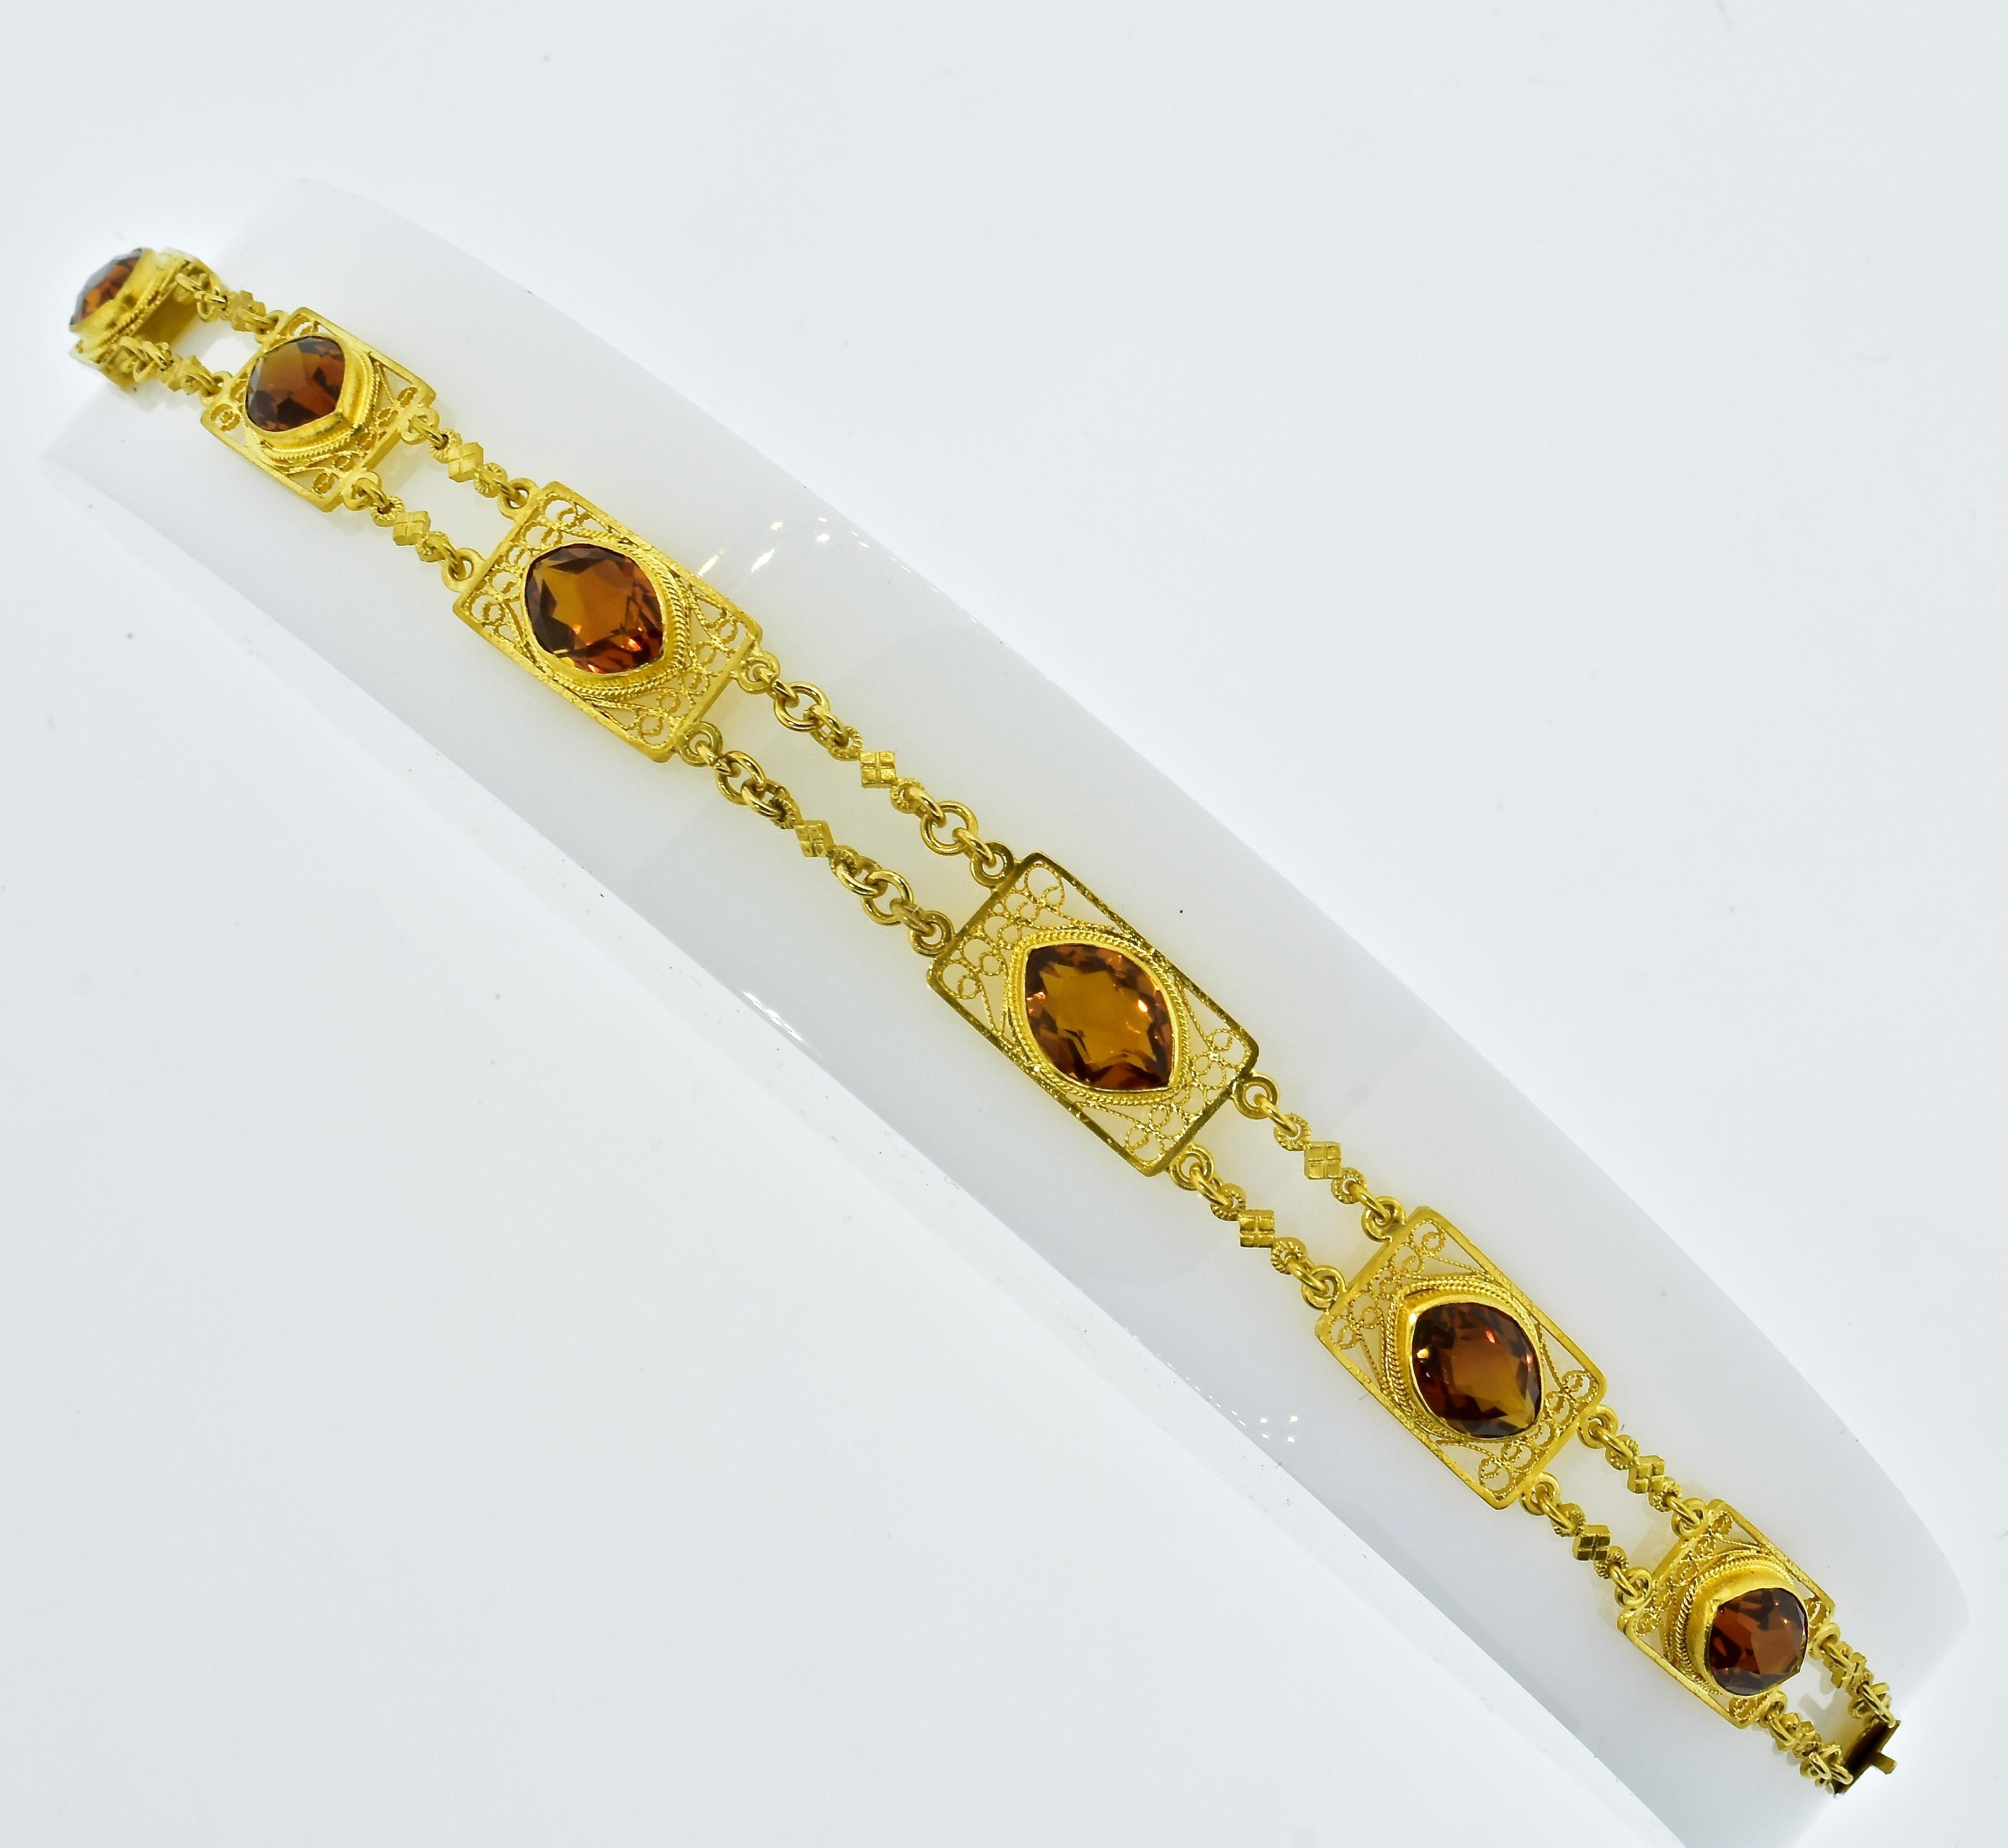 Antique,  hand made bracelet possessing 6 finely matched marquis cut natural deep orange citrines.  Often called Madeira-colored Citrine, these stones, weighing totally approximately 15 cts., are all well matched with fine vibrant clear color.  This